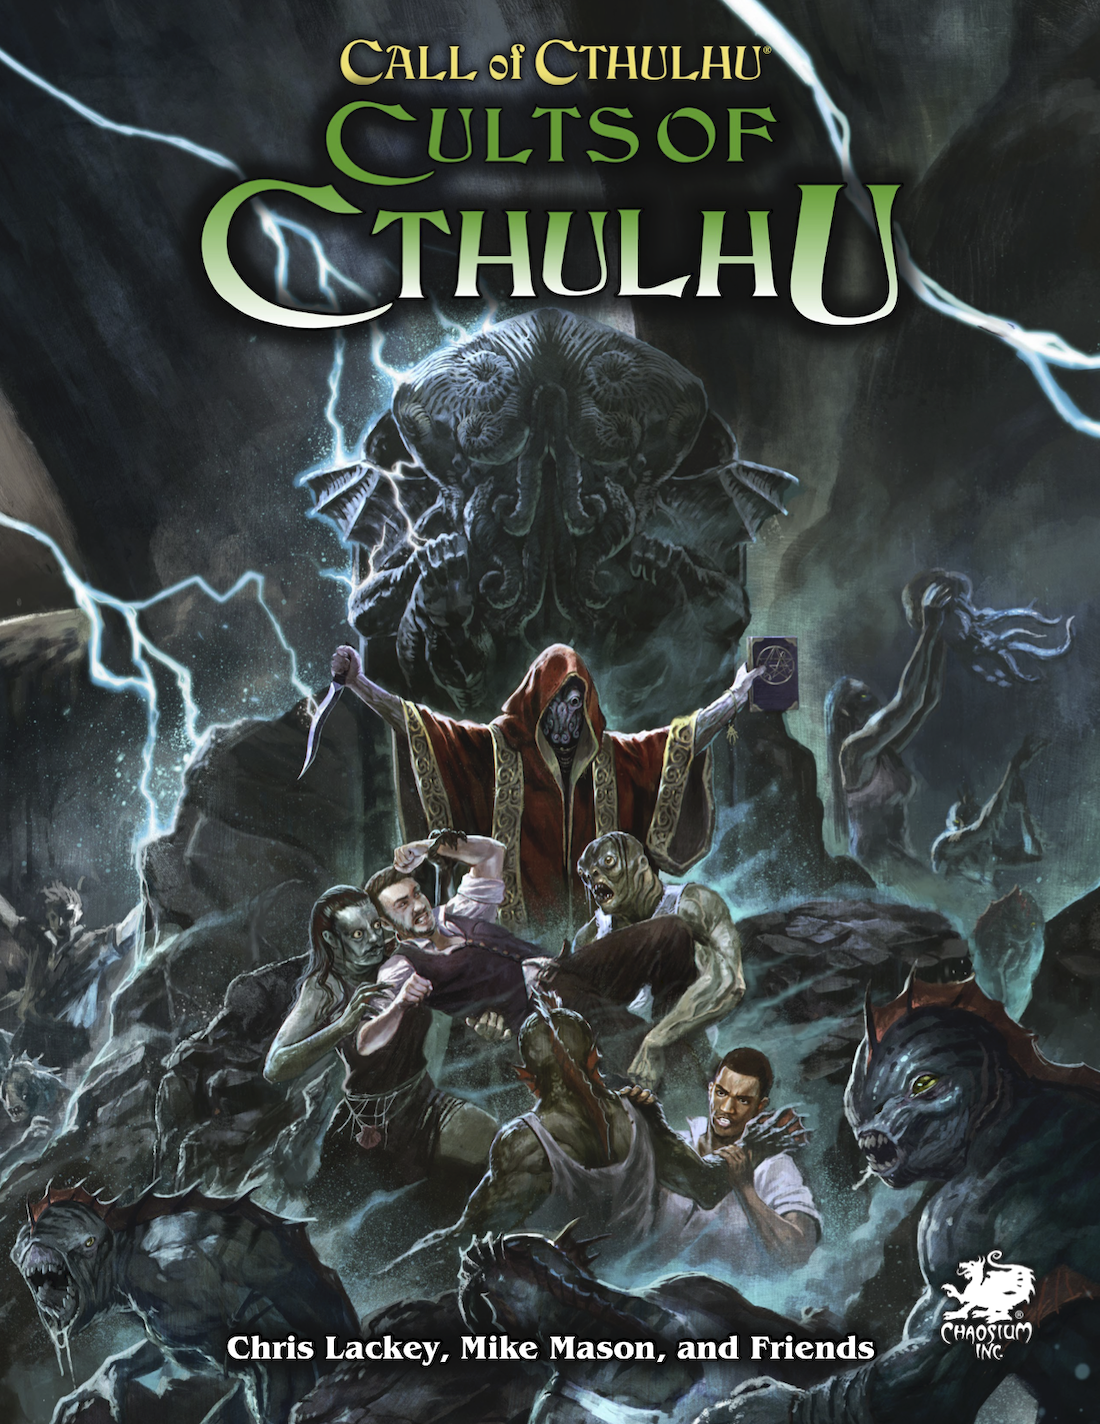 Call of Cthulhu (7th Edition): Cults of Cthulhu (HC) 